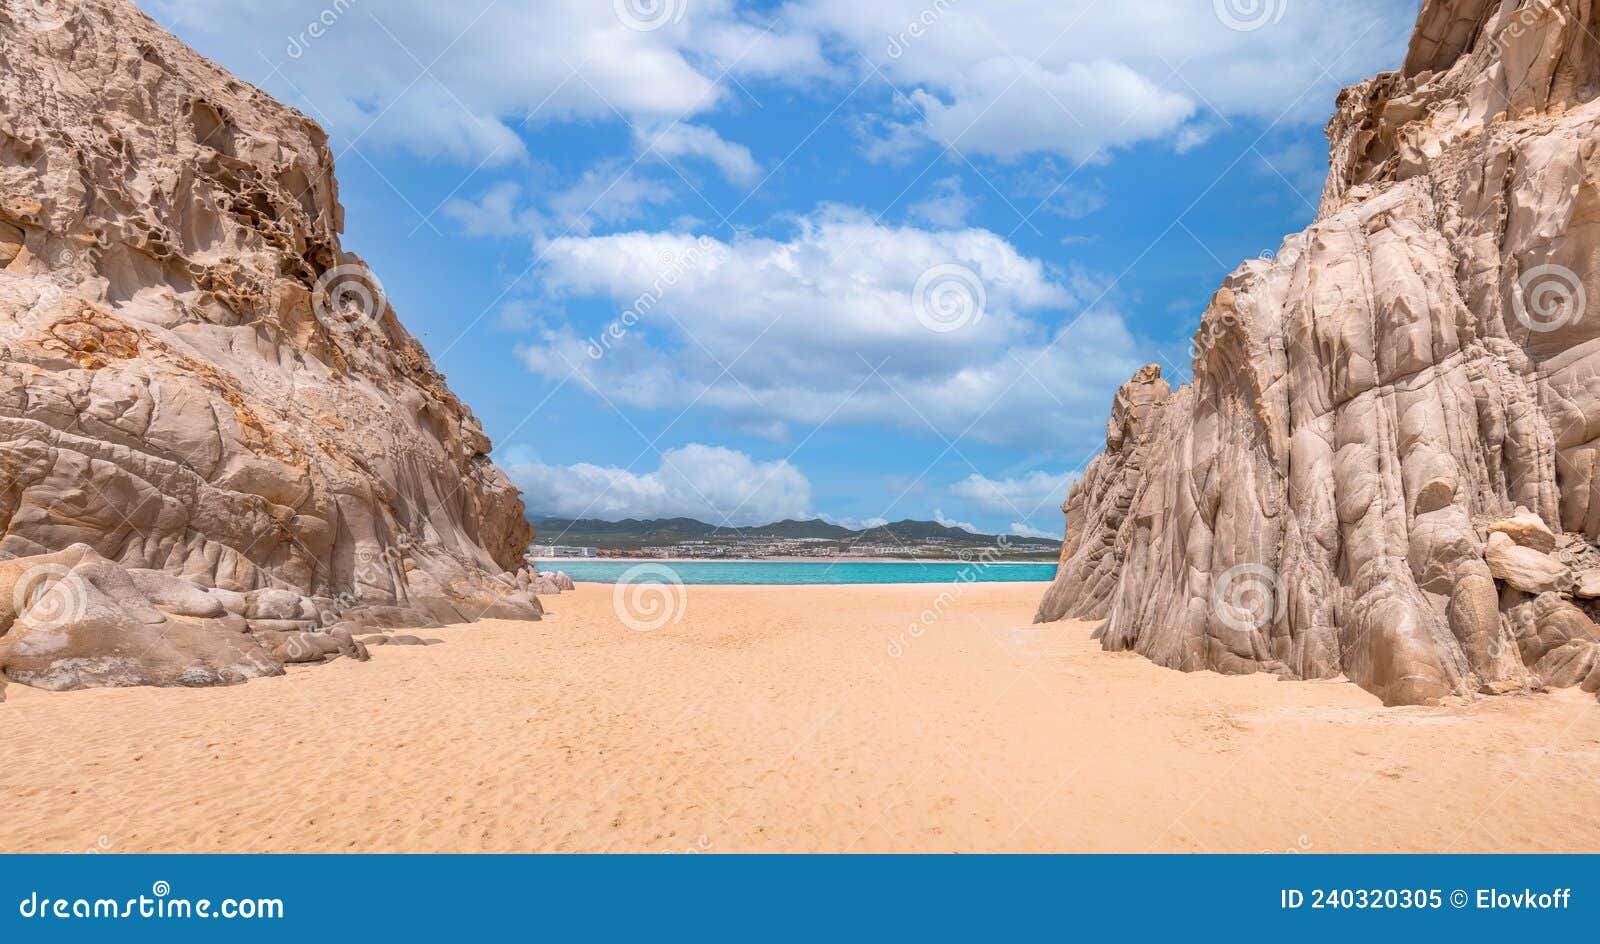 mexico, scenic travel destination beach playa amantes, lovers beach known as playa del amor located near famous arch of